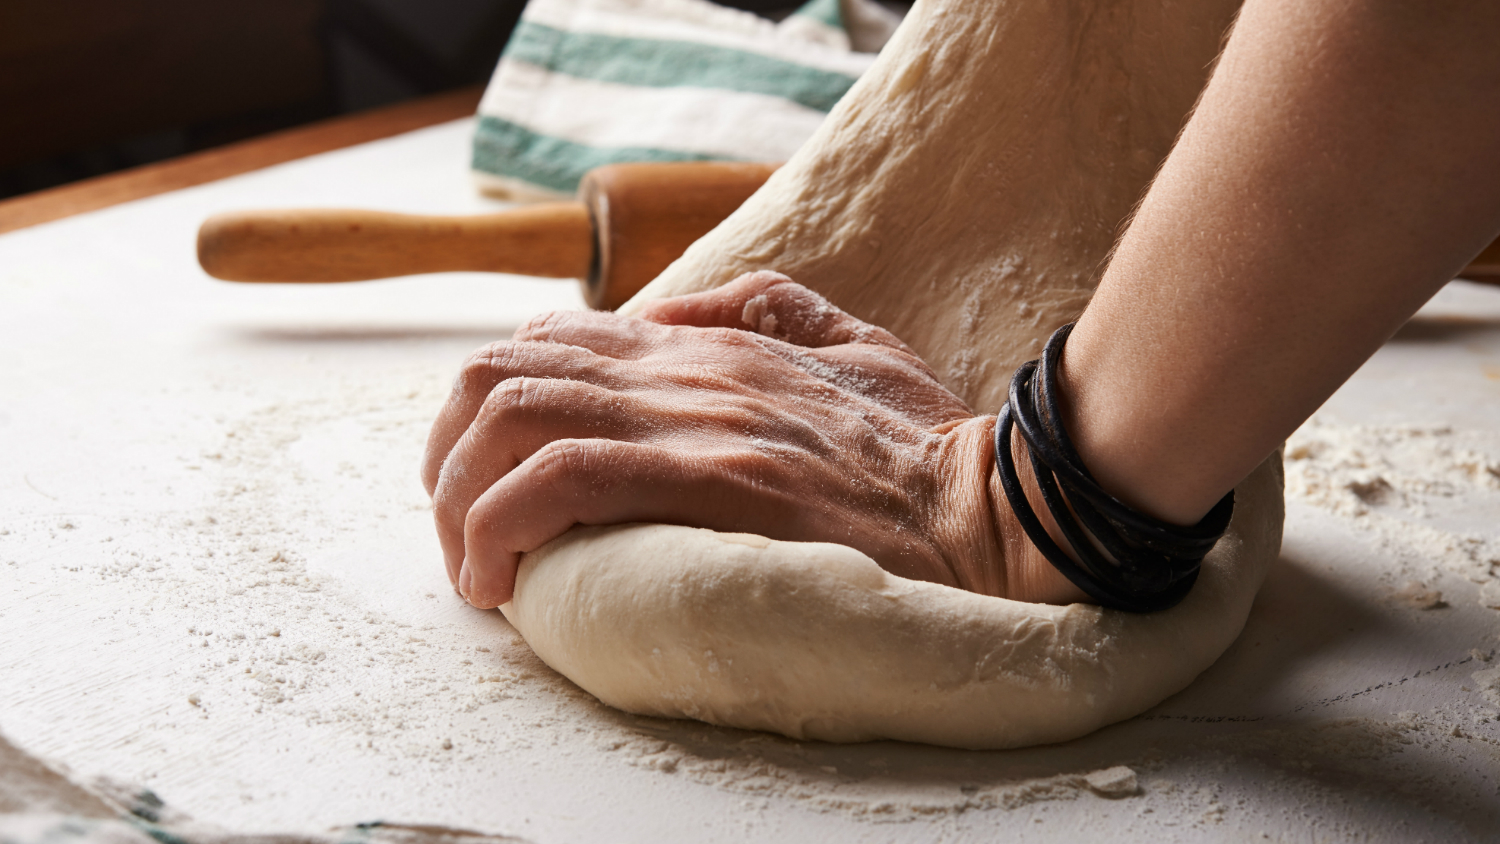 A photo of hands kneading bread